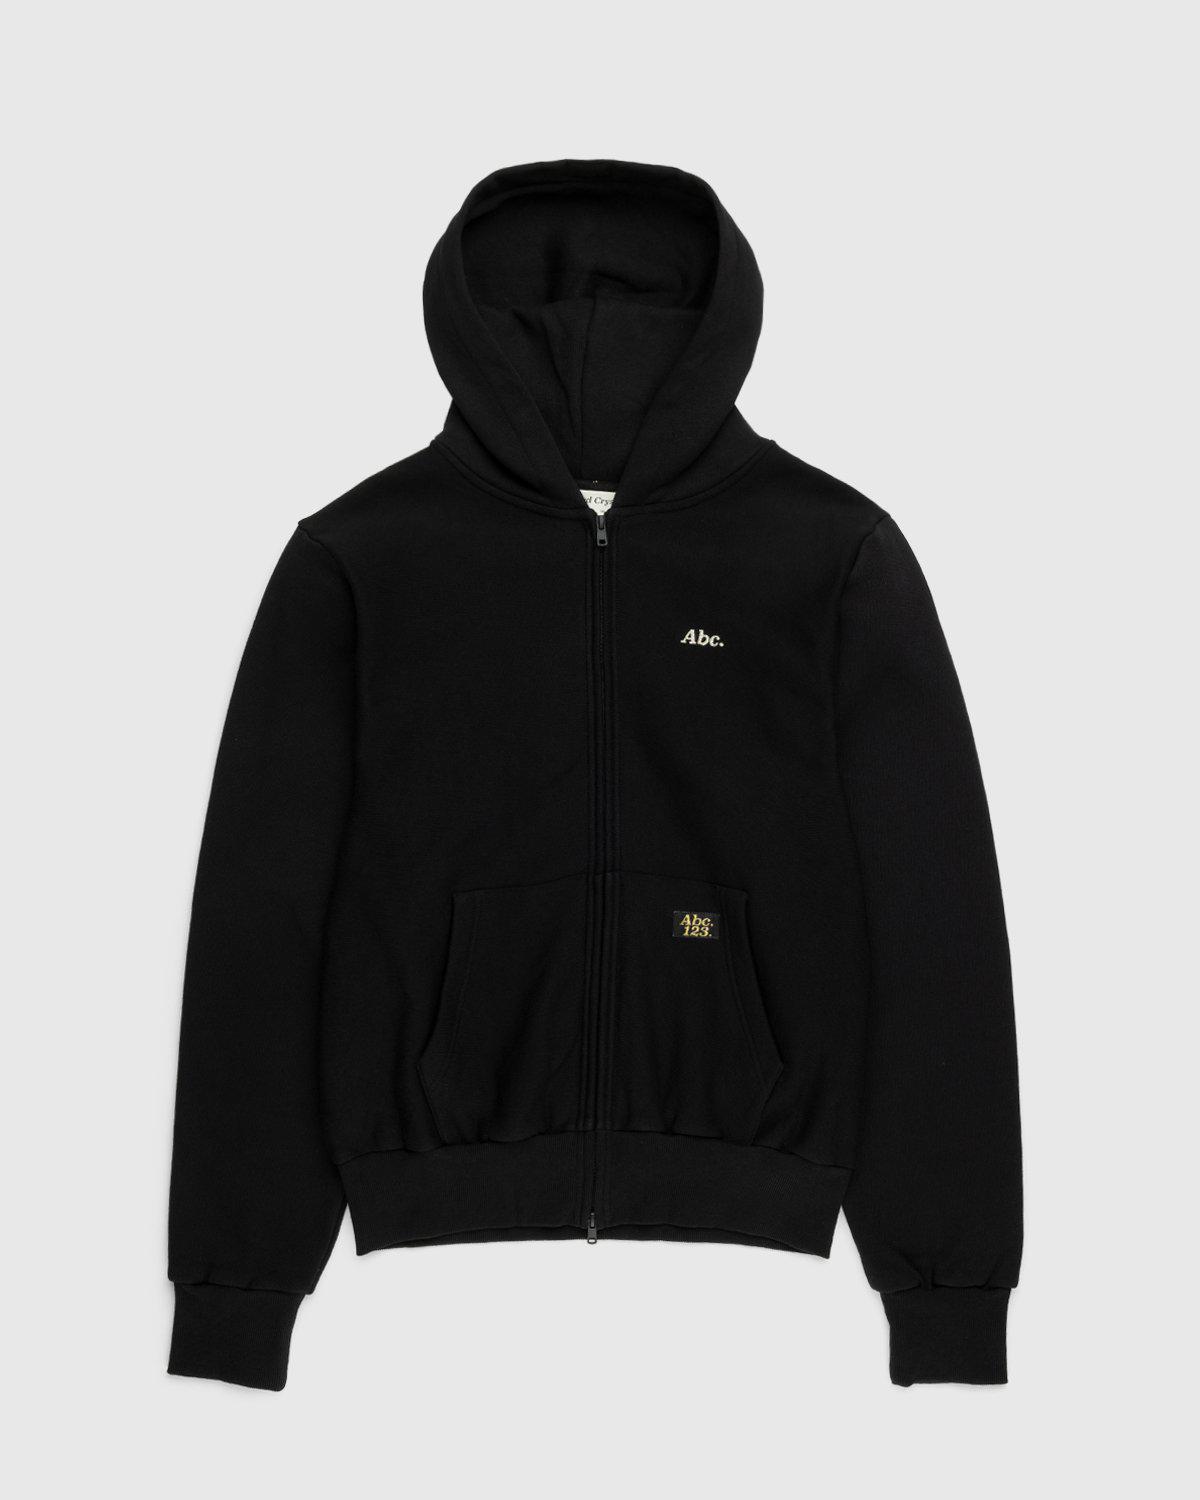 Abc. – Zip-Up French Terry Hoodie Anthracite by ABC.